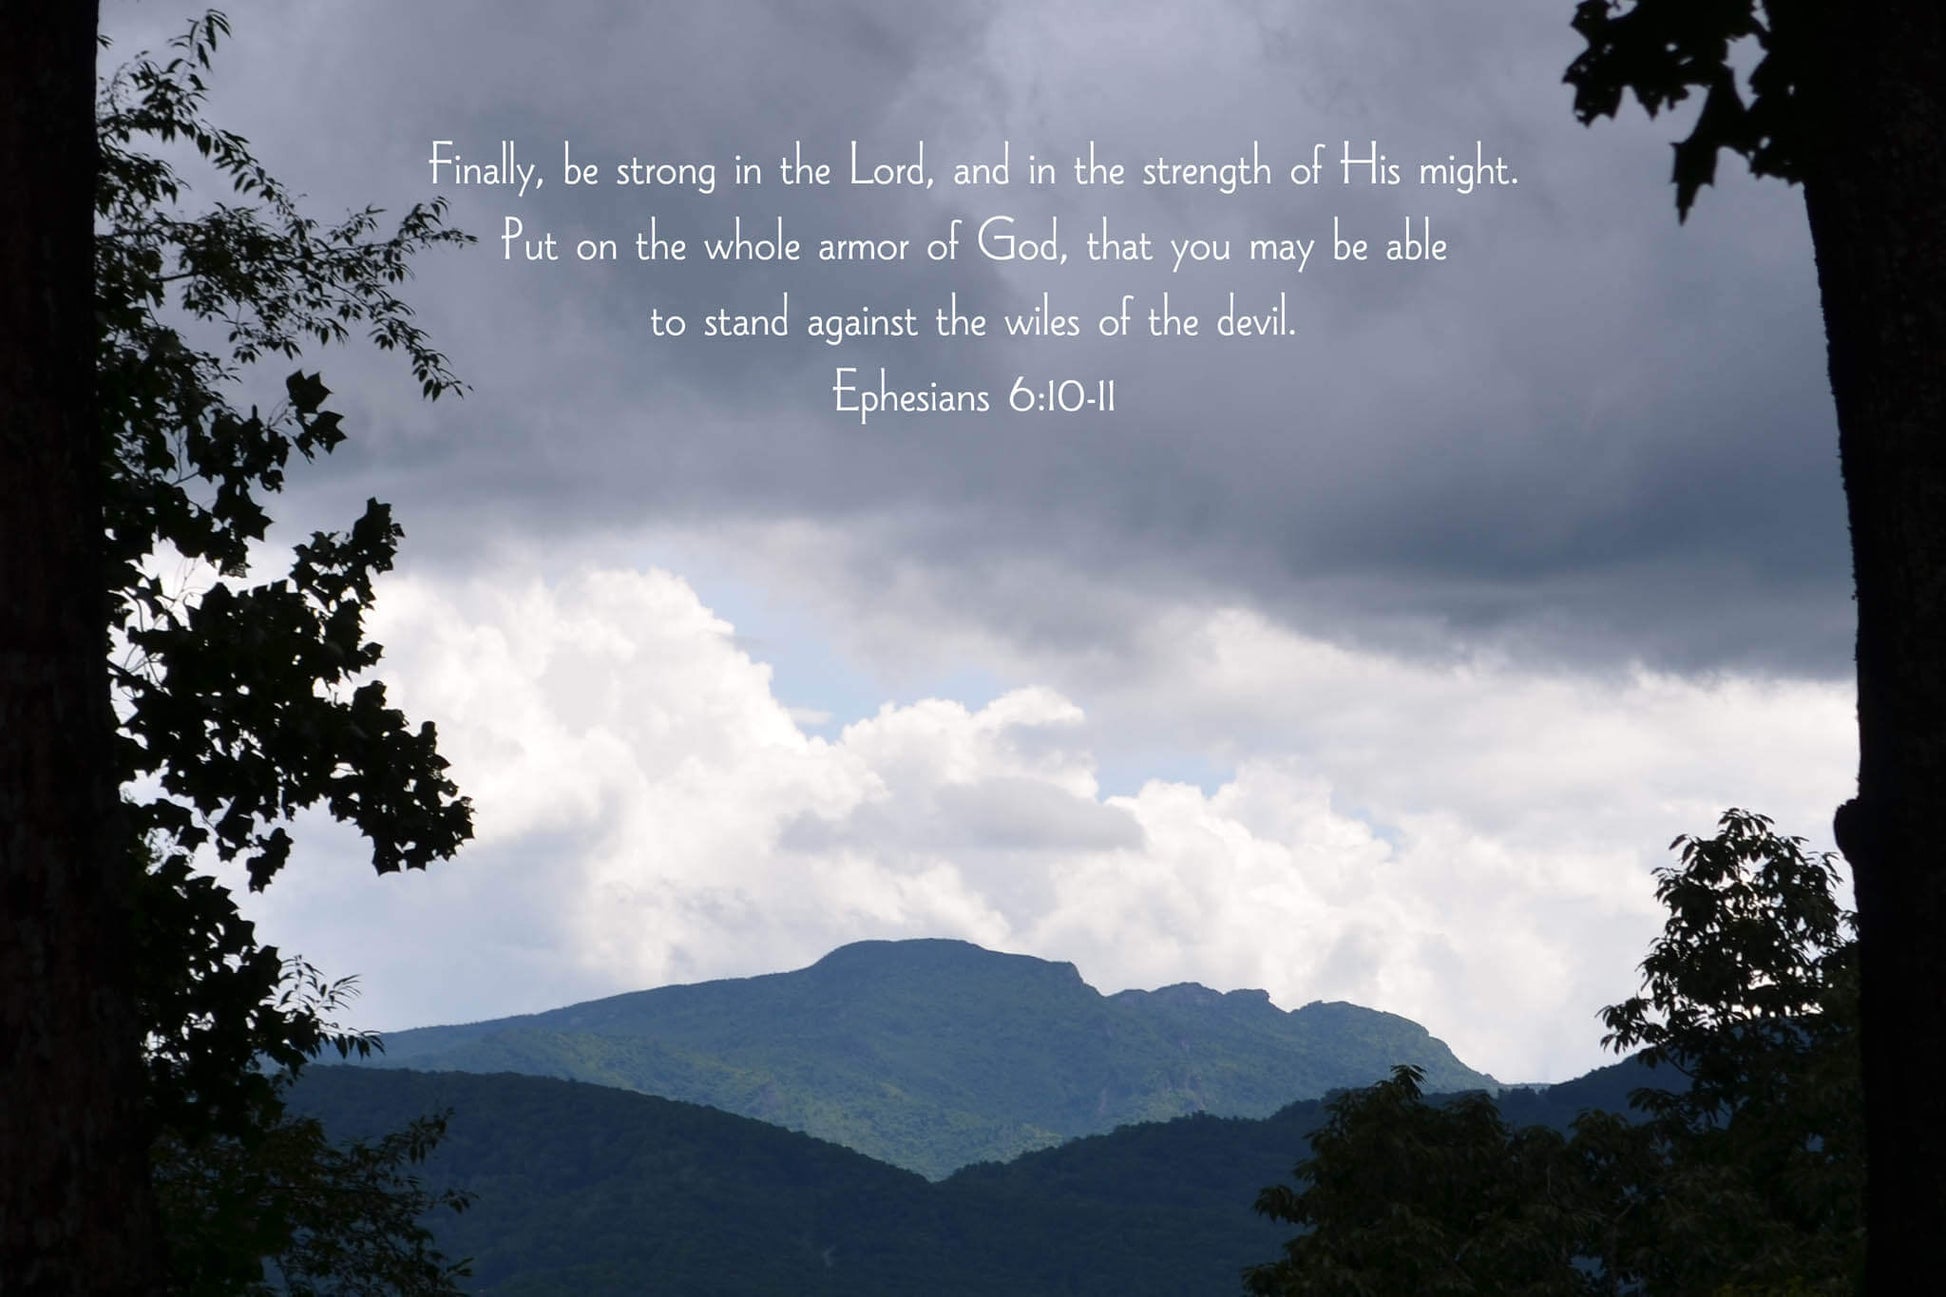 Ephesians 6:10-11 Approaching Storm Christian greeting card